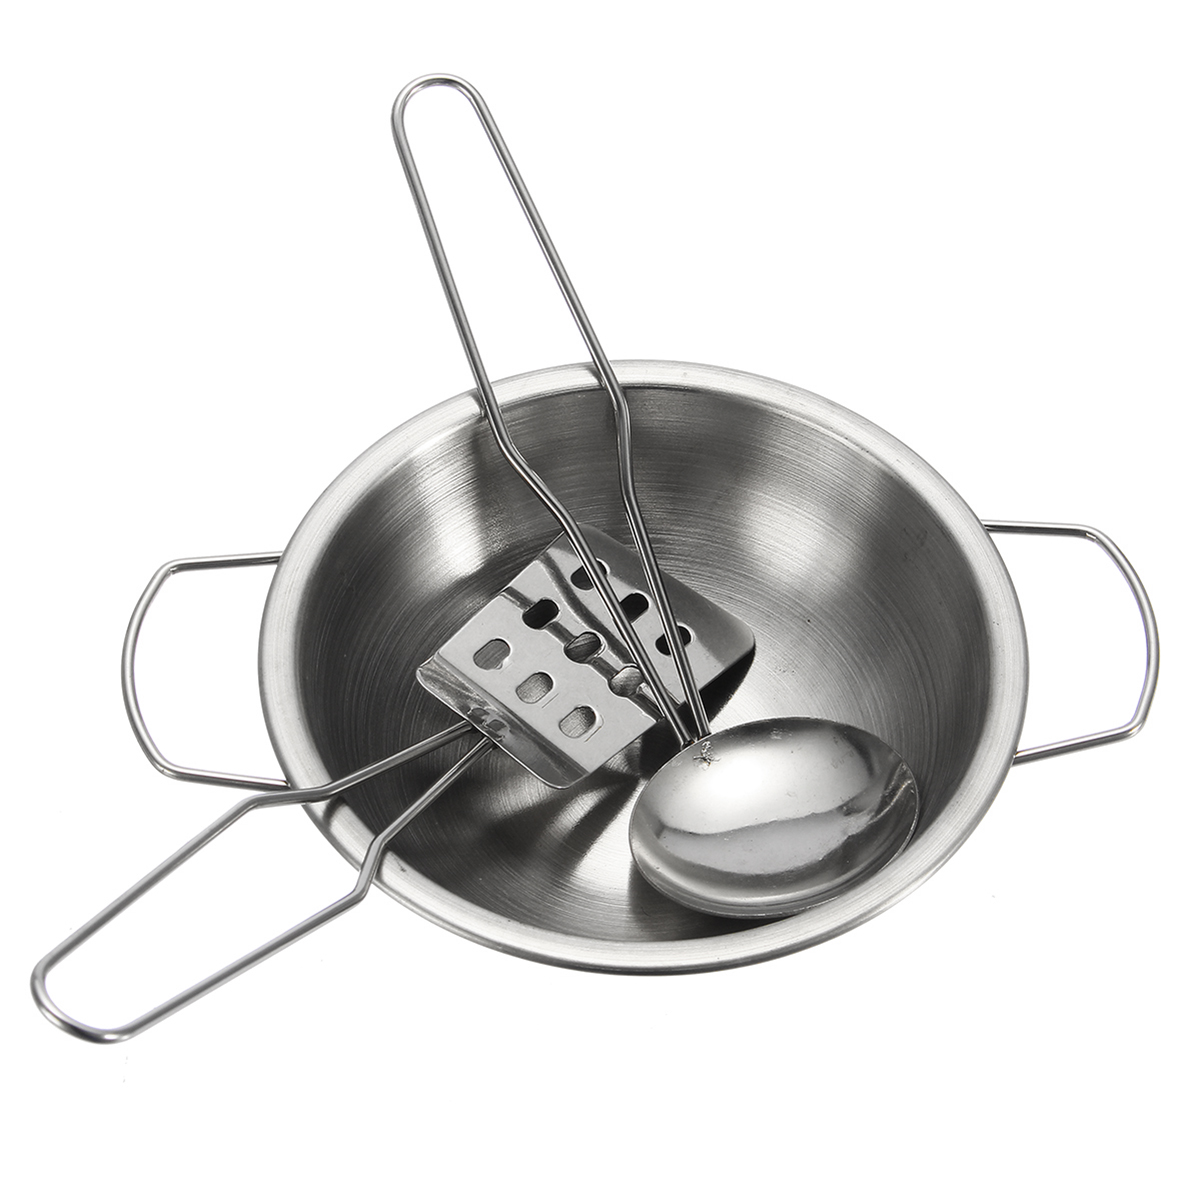 10pc-Stainless-steel-Cookware-Kitchen-Cooking-Set-Pot-Pans-House-Play-Toy-For-Children-1418086